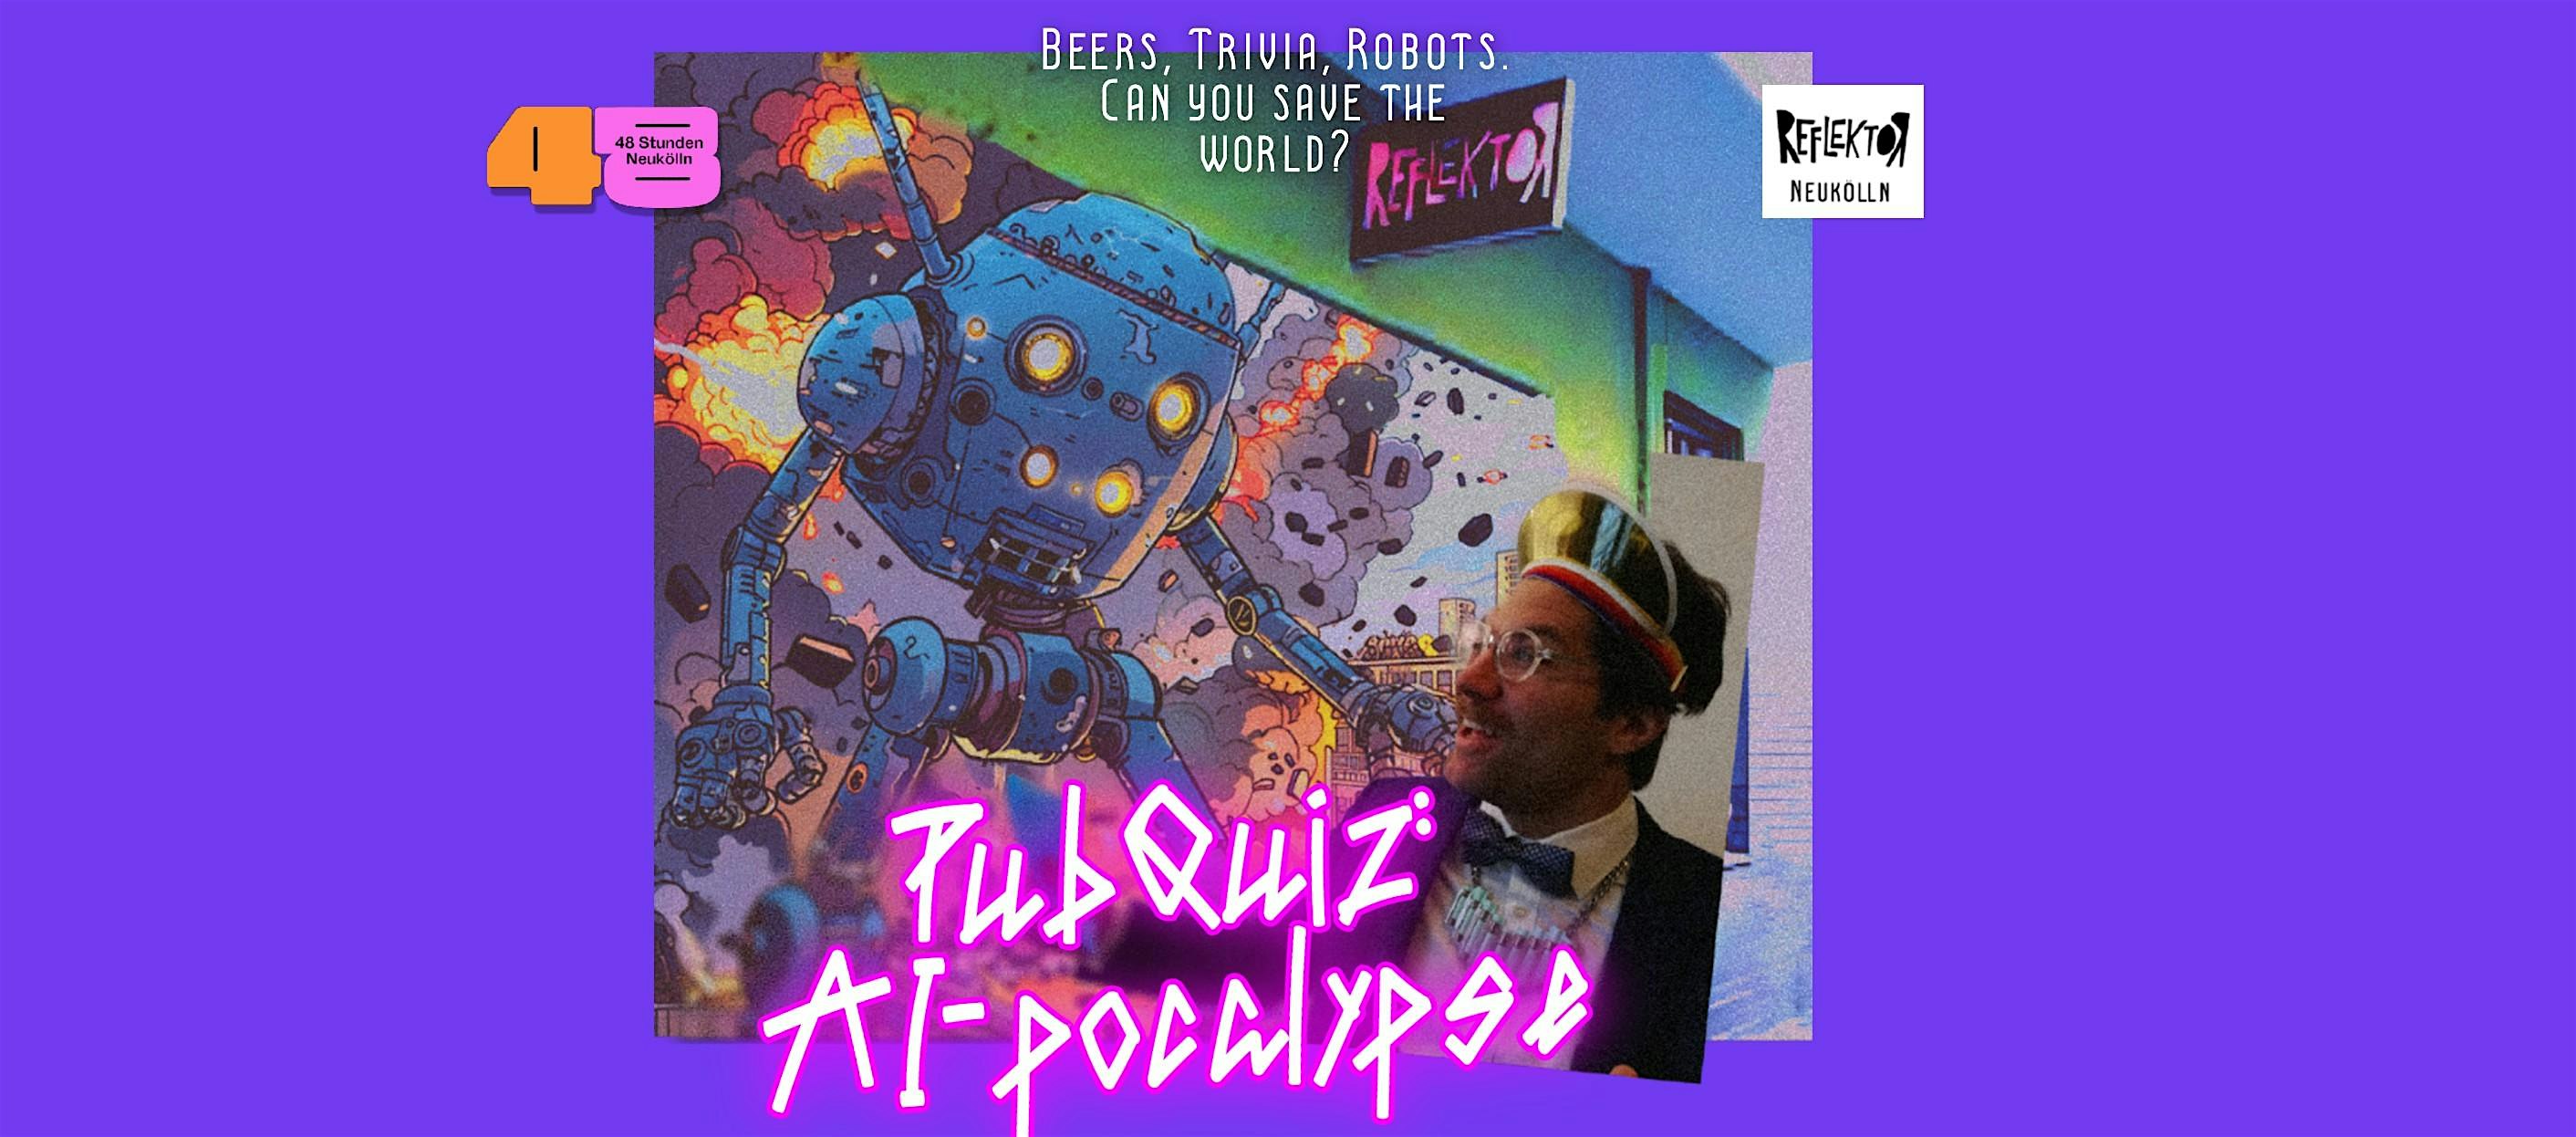 Pubquiz "AI-pocalypse" - Save the World from the robots - and drink beer!